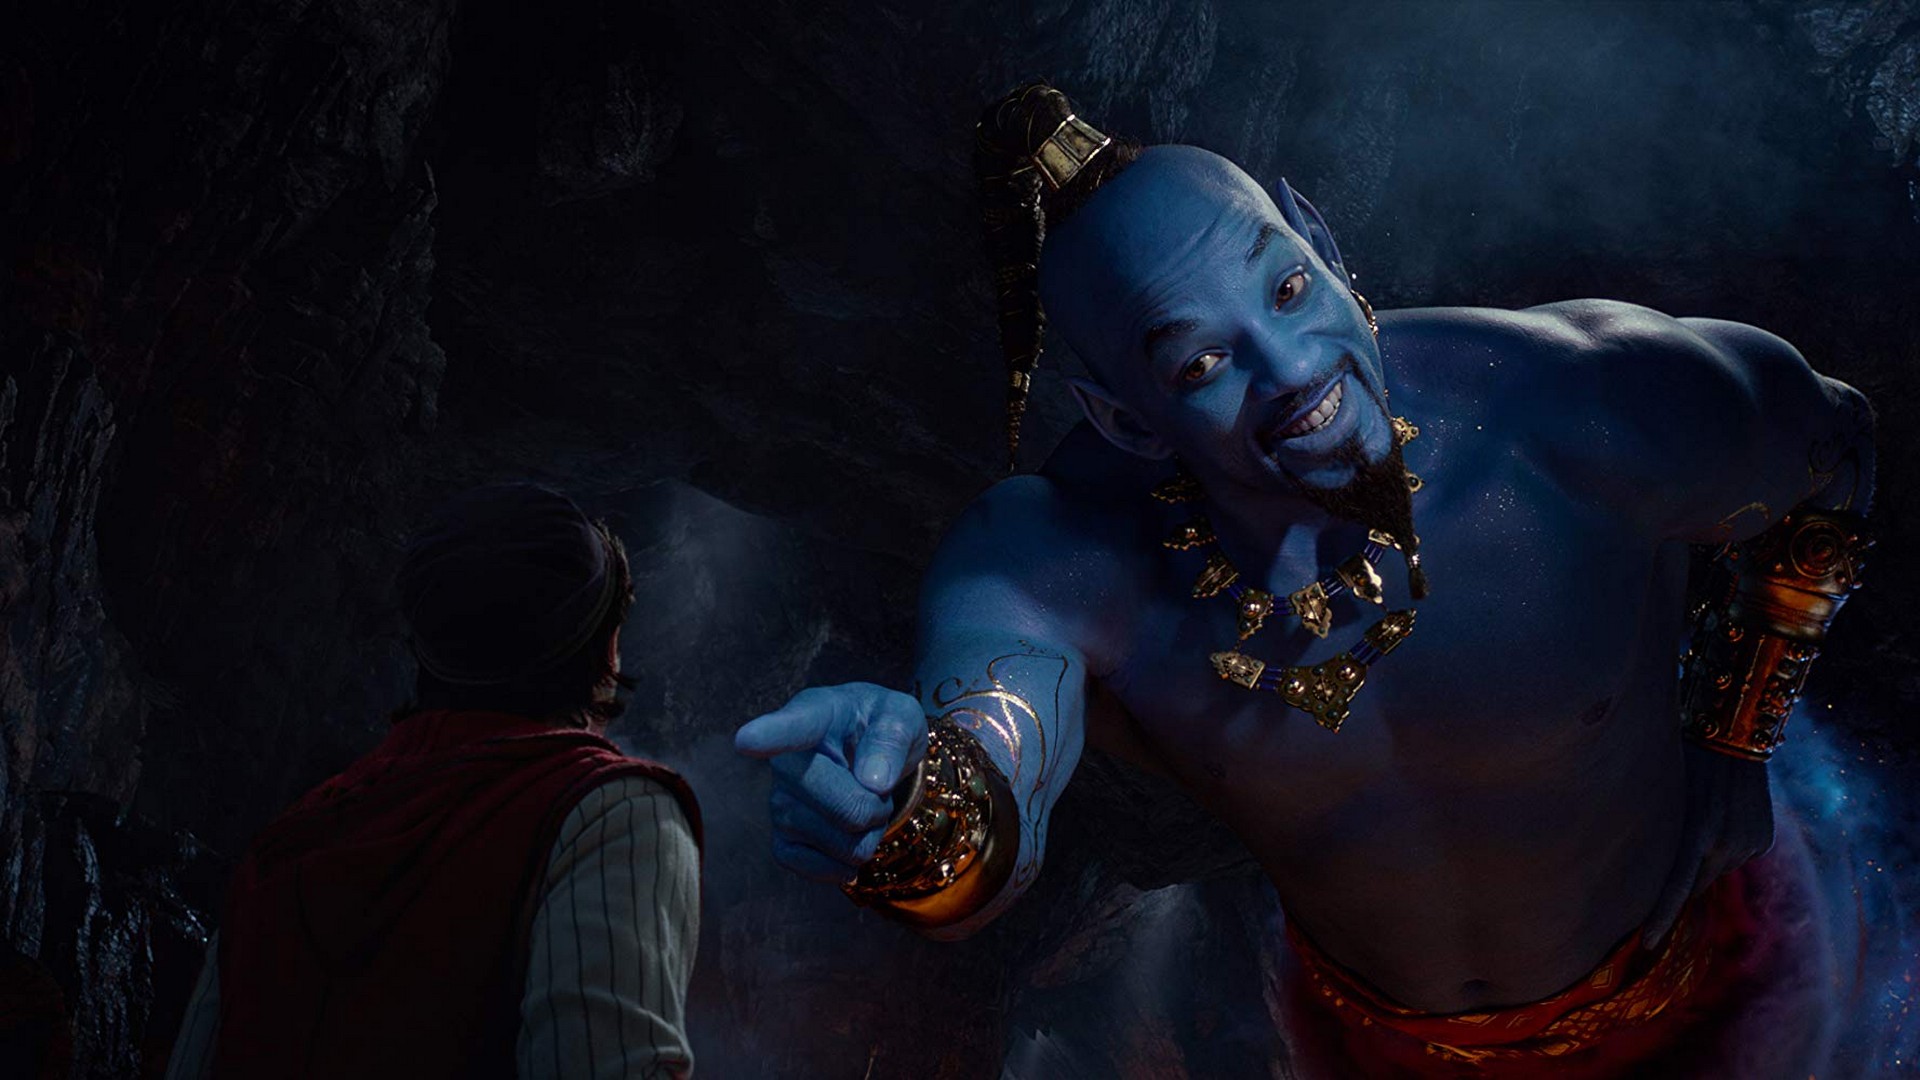 Will Smith Aladdin 2019 Wallpaper HD with high-resolution 1920x1080 pixel. You can use this poster wallpaper for your Desktop Computers, Mac Screensavers, Windows Backgrounds, iPhone Wallpapers, Tablet or Android Lock screen and another Mobile device